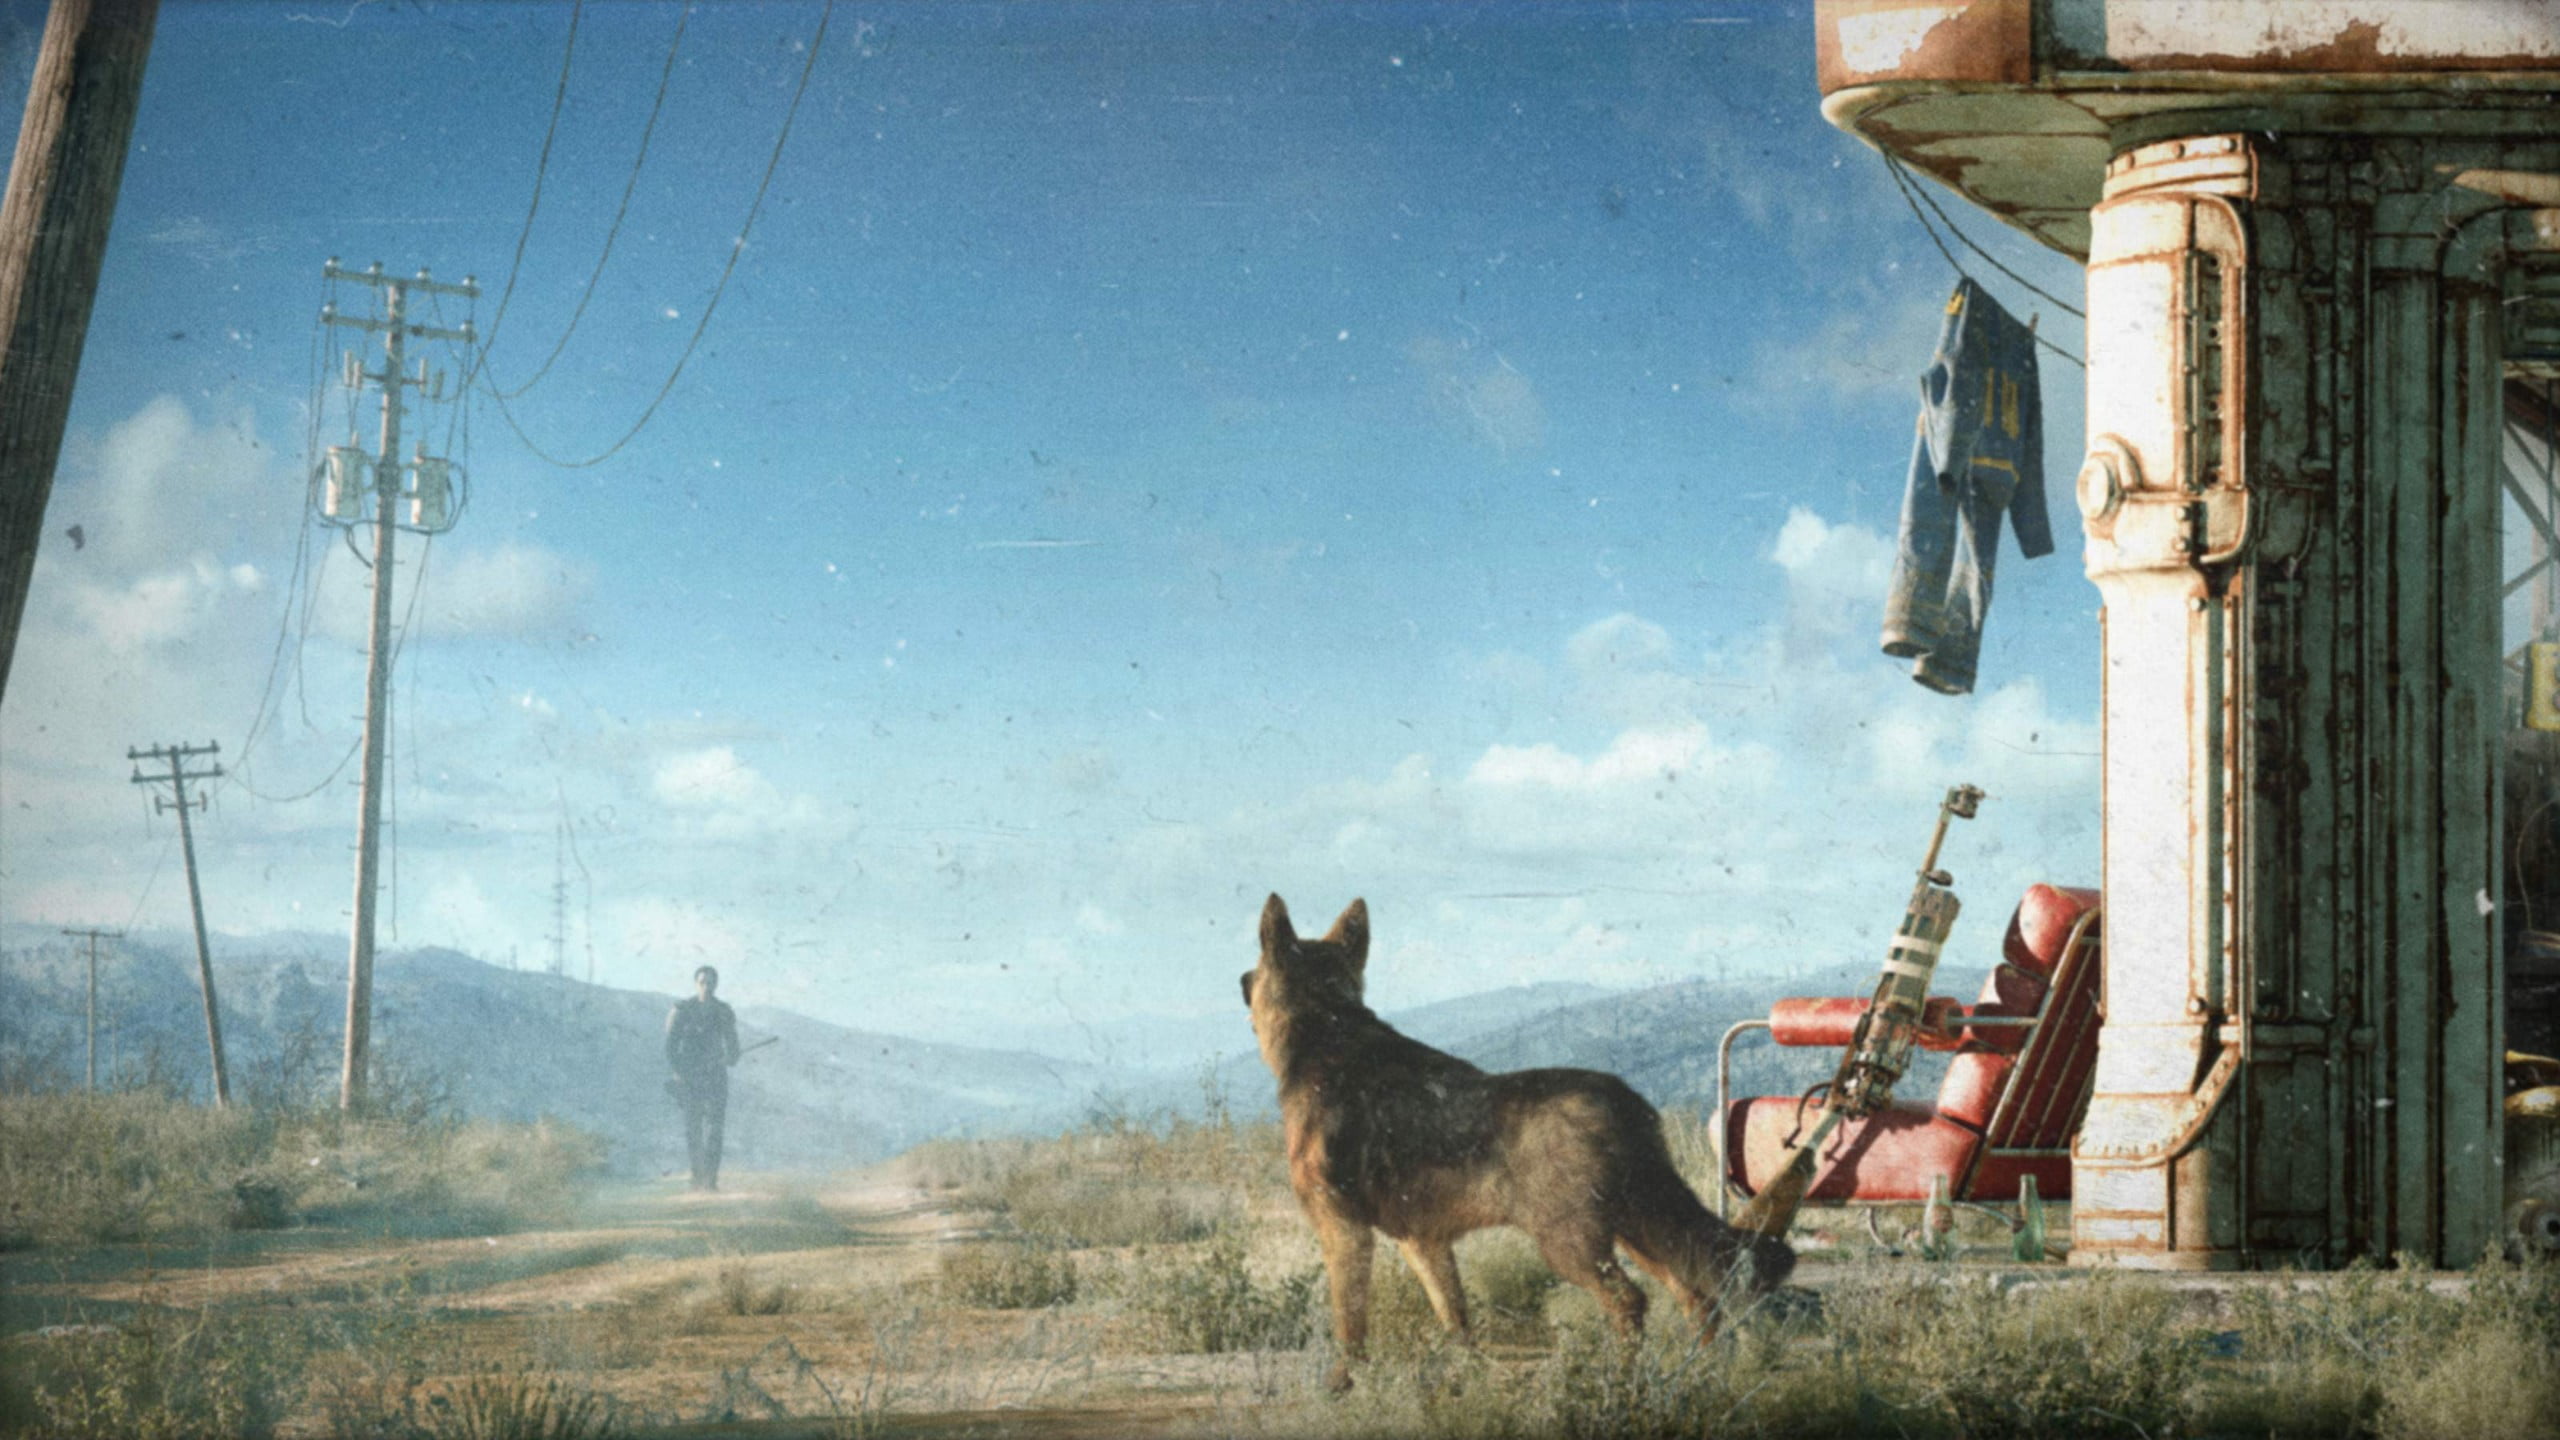 Sleeping Dog game wallpaper, Fallout, video games, Fallout 4